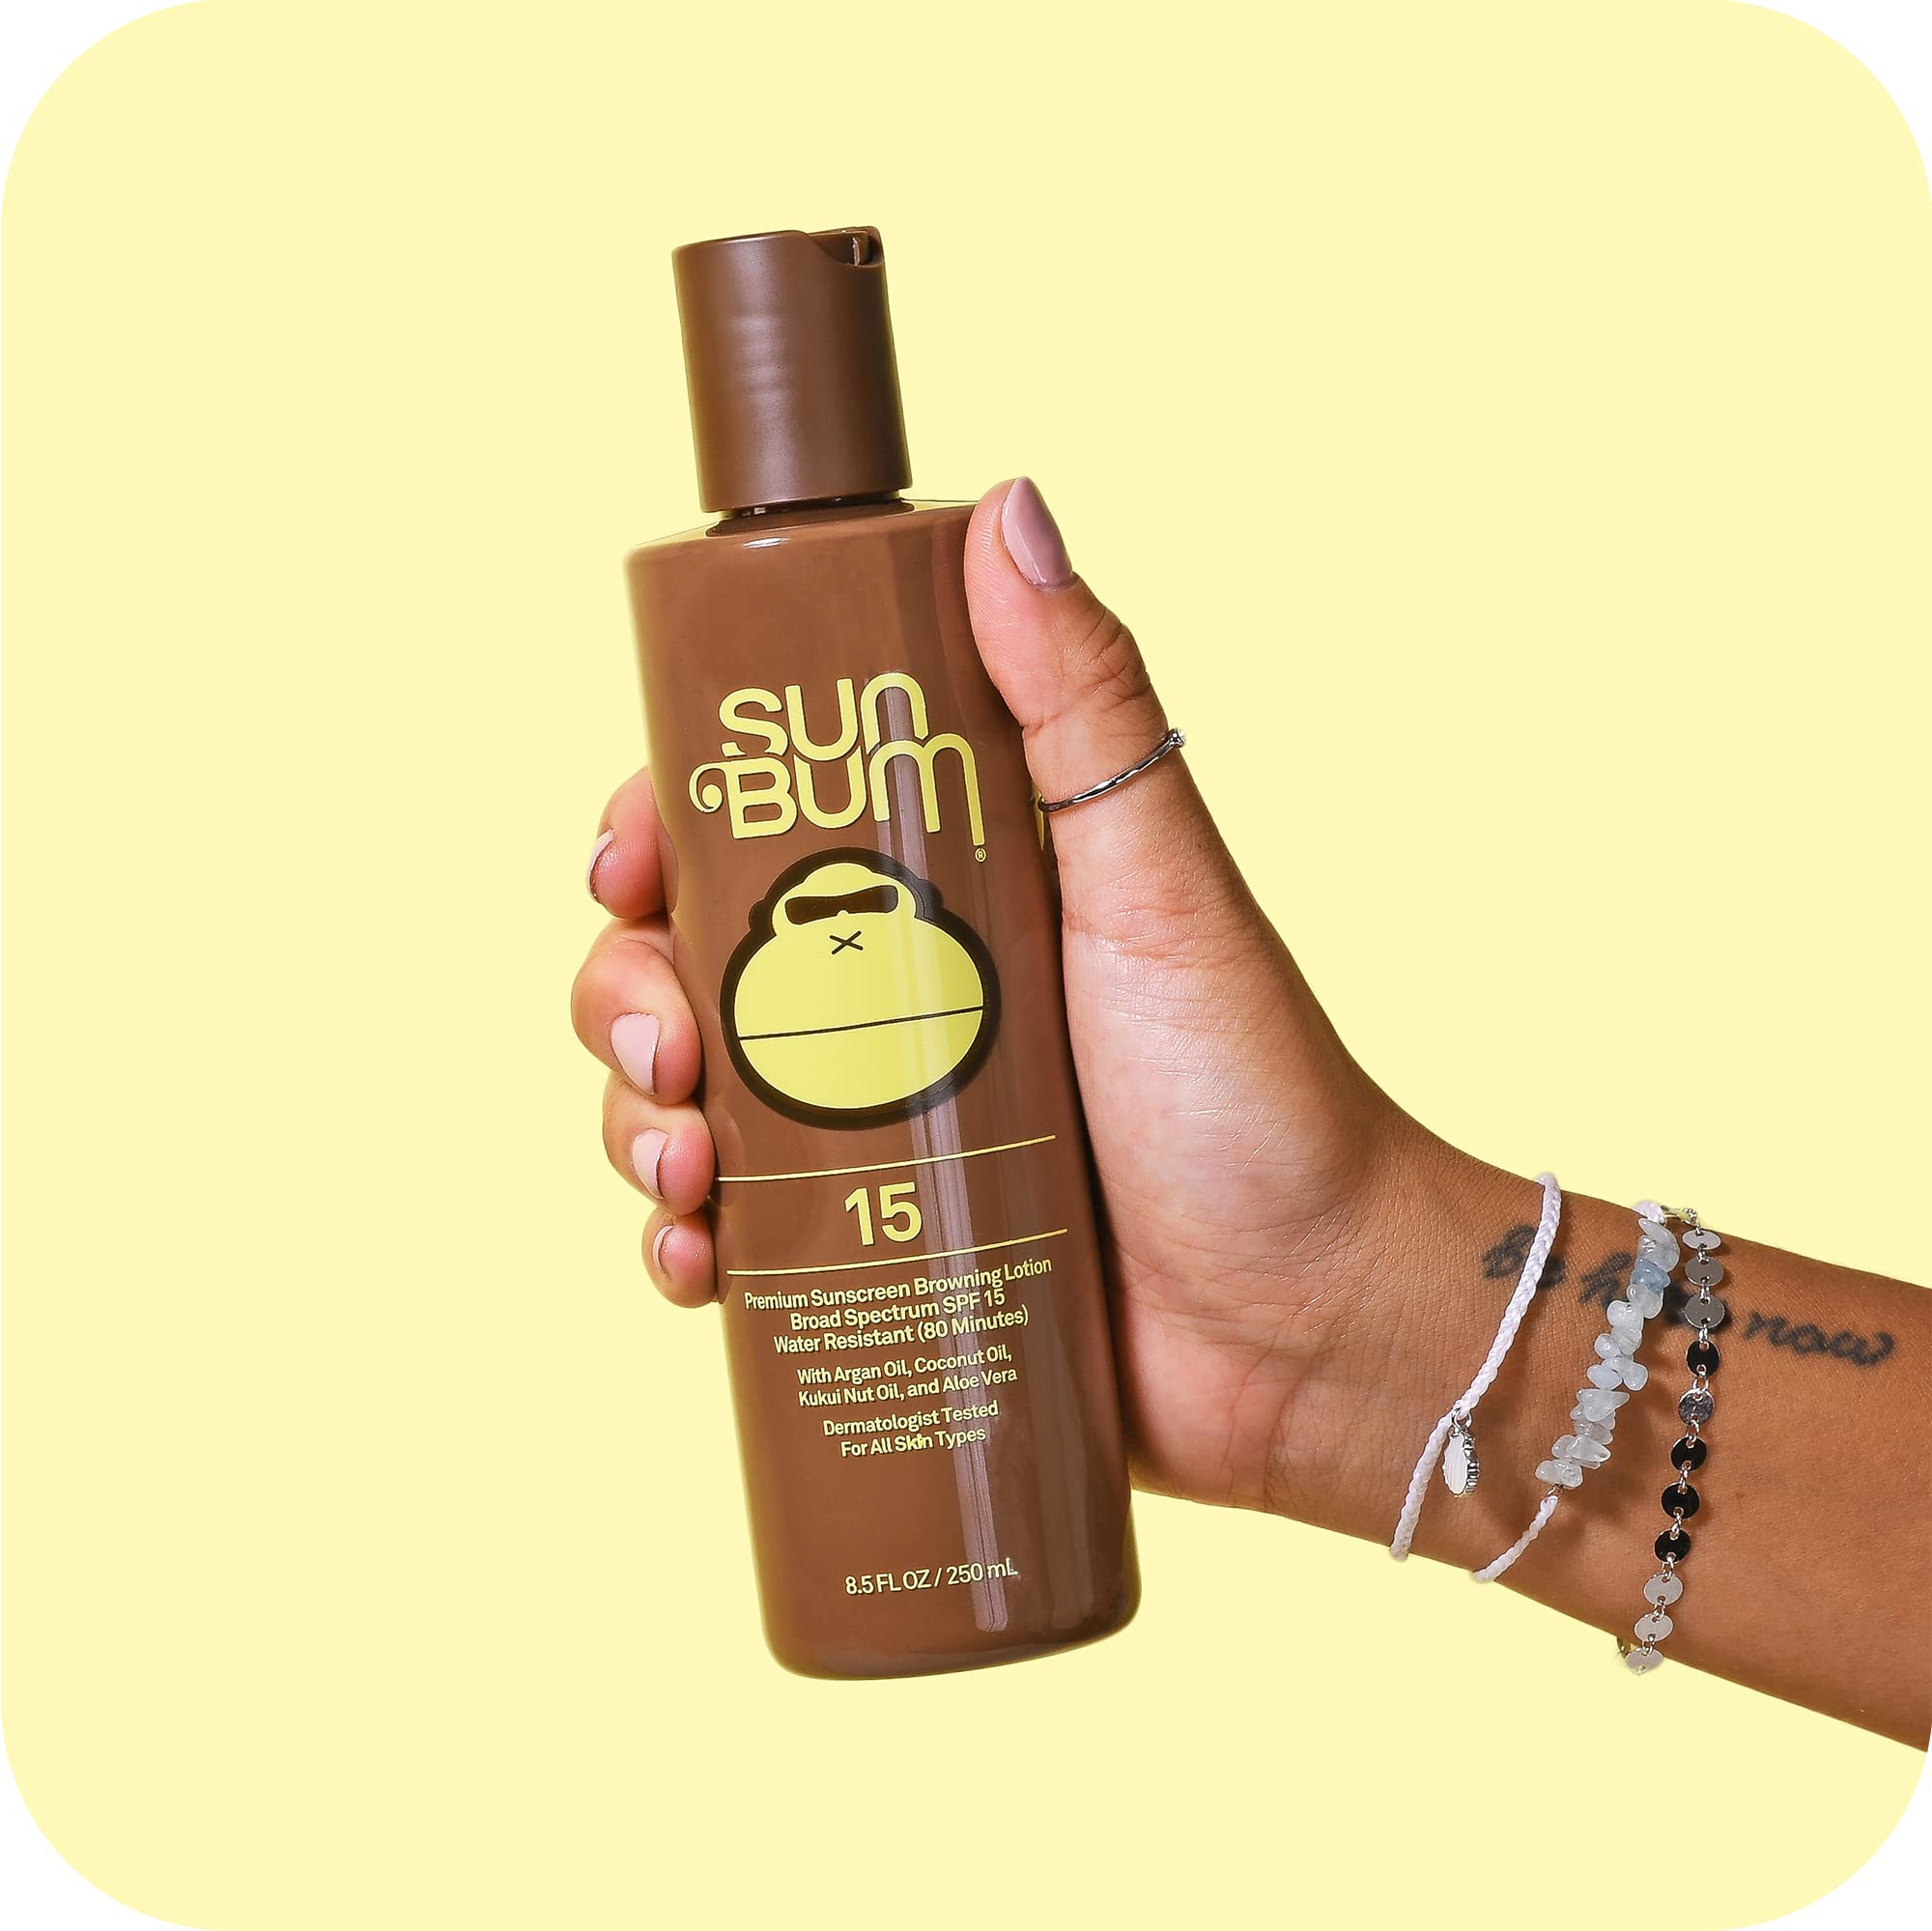 Sun Bum SPF 15 Browning Lotion | Vegan and Hawaii 104 Reef Act Compliant (Octinoxate & Oxybenzone Free) Broad Spectrum Moisturizing UVA/UVB Sunscreen Tanning Lotion with Vitamin E | 8.5 oz